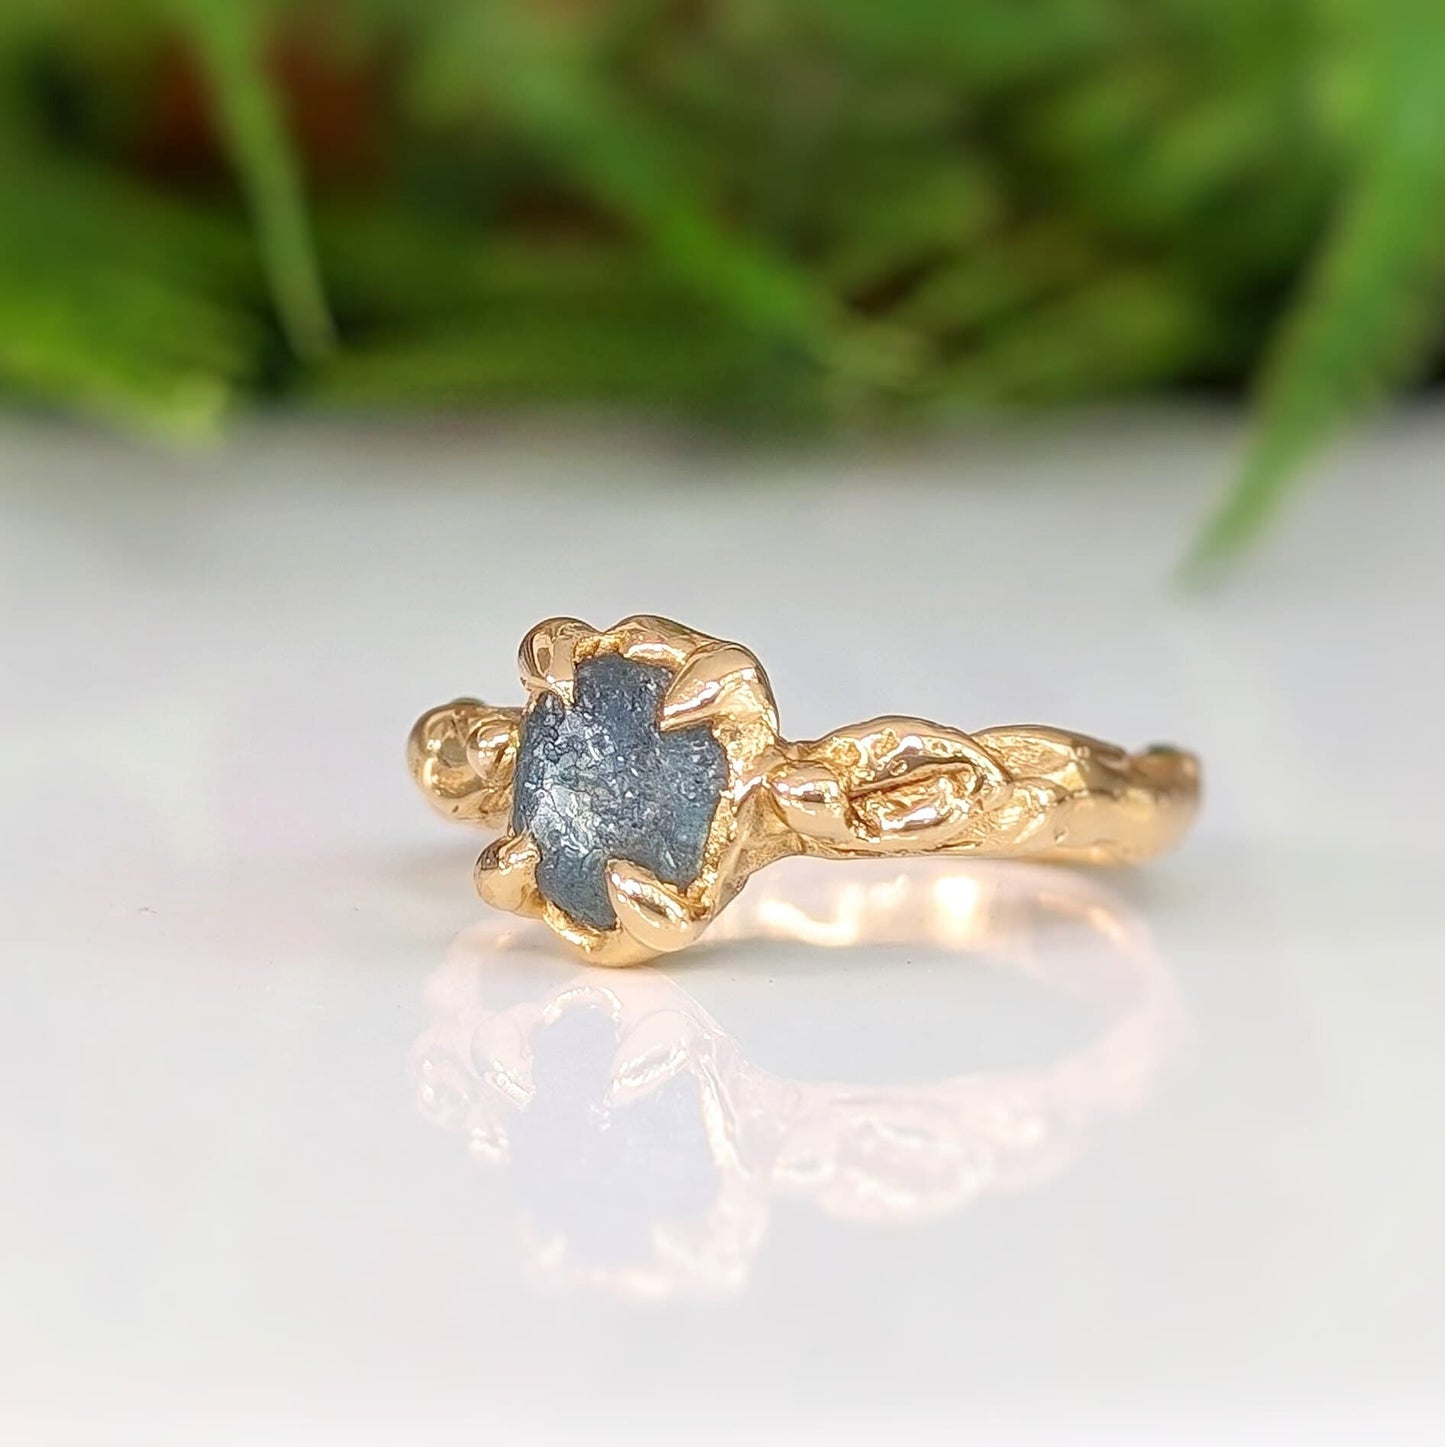 Raw Montana Sapphire set by prongs on a textured Solid 14k Gold band